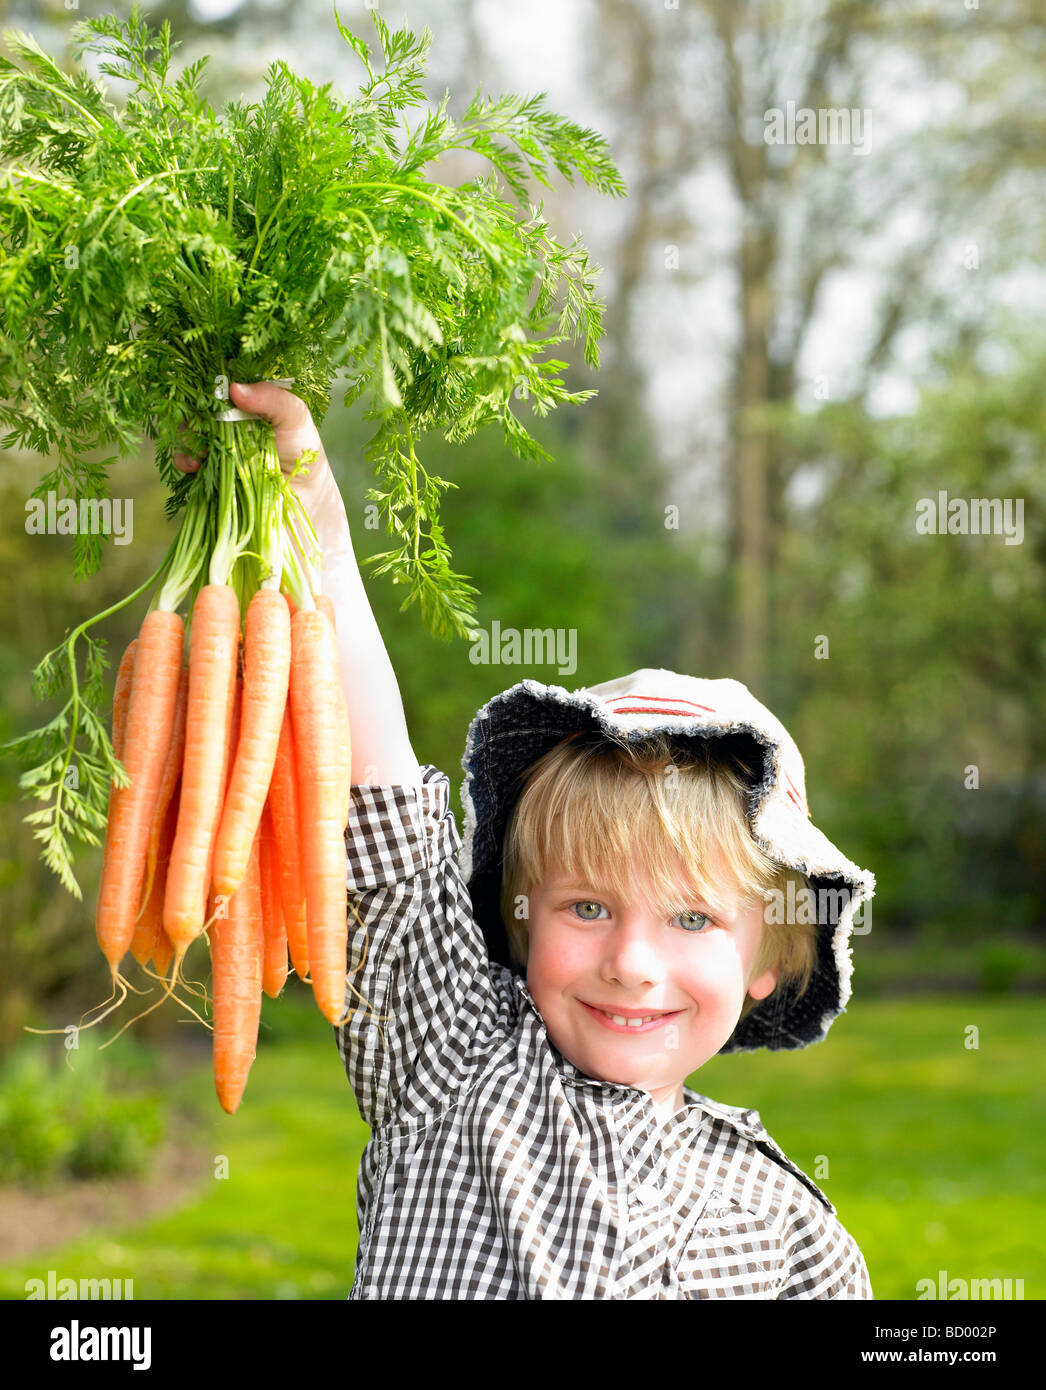 Boy holding a carrot bunch Stock Photo